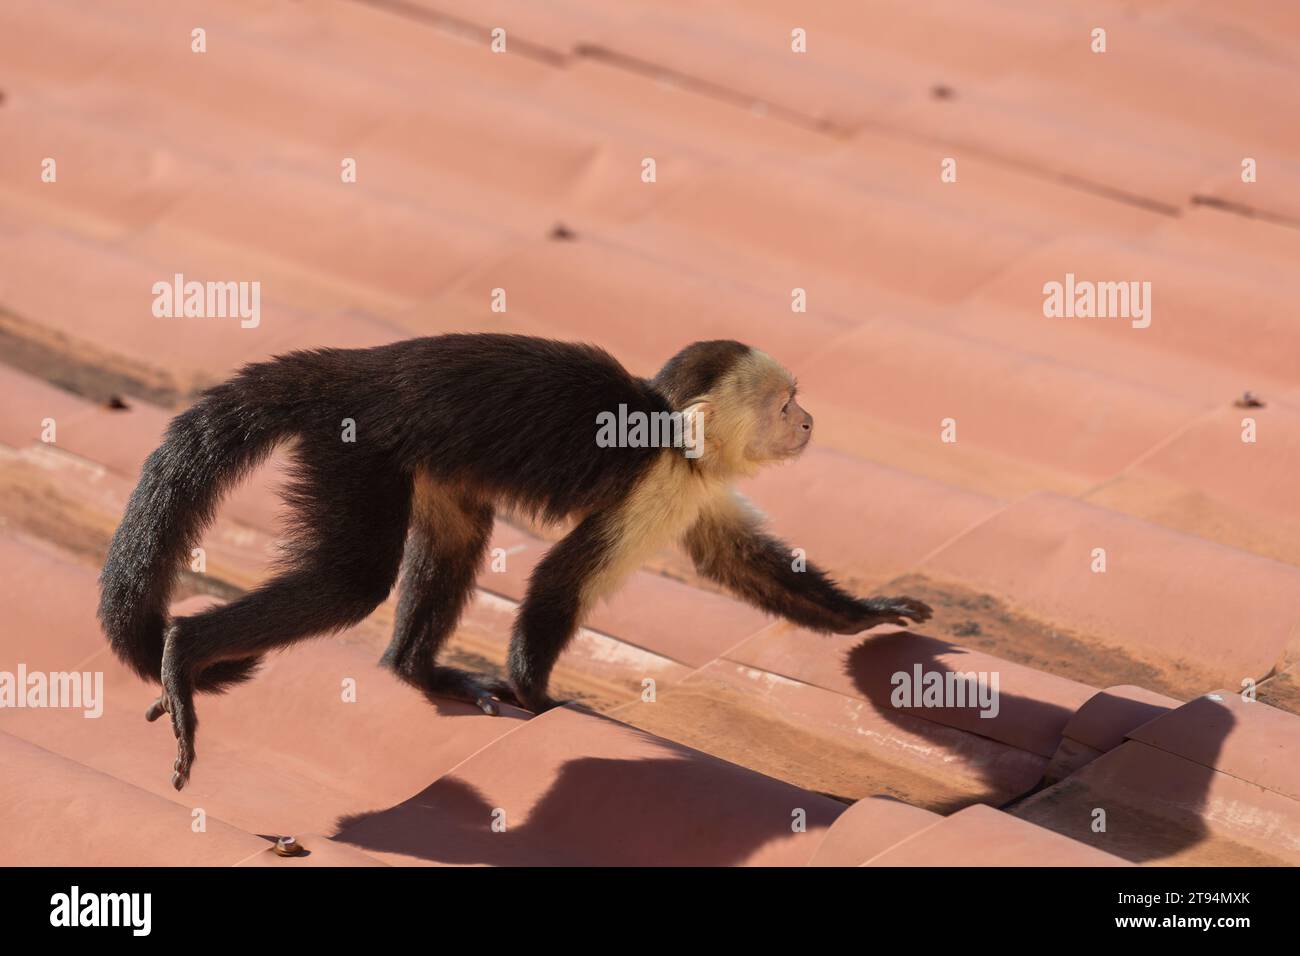 A determined looking wild capuchin monkey moving along a rooftop in Costa Rica. Stock Photo